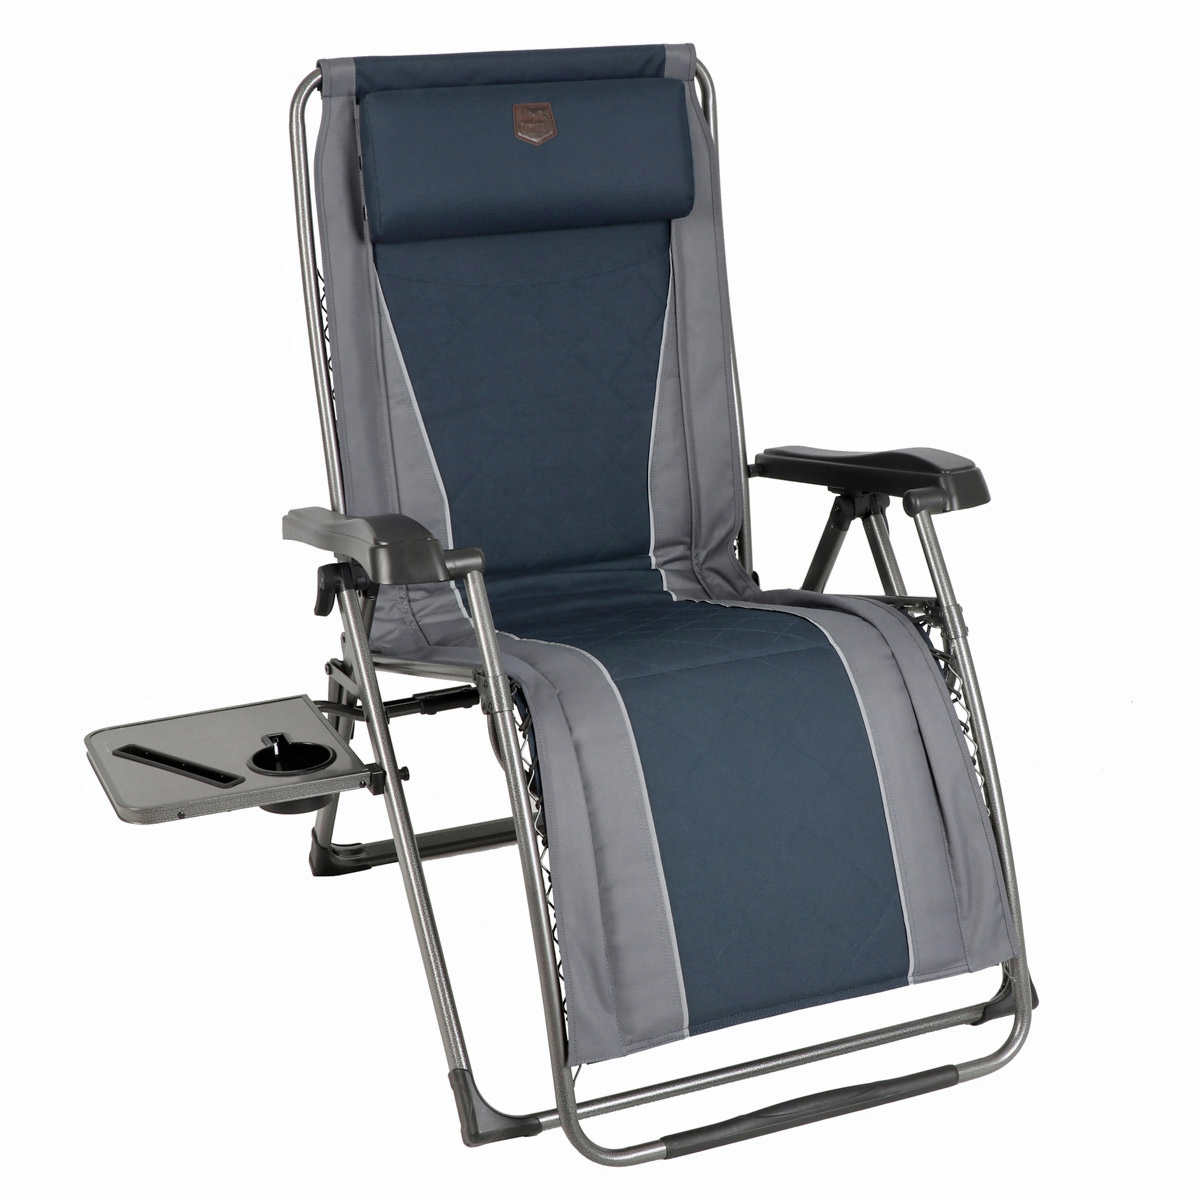 Timber Ridge Zero Gravity Lounger Costco, Director S Chair With Side Table Costco